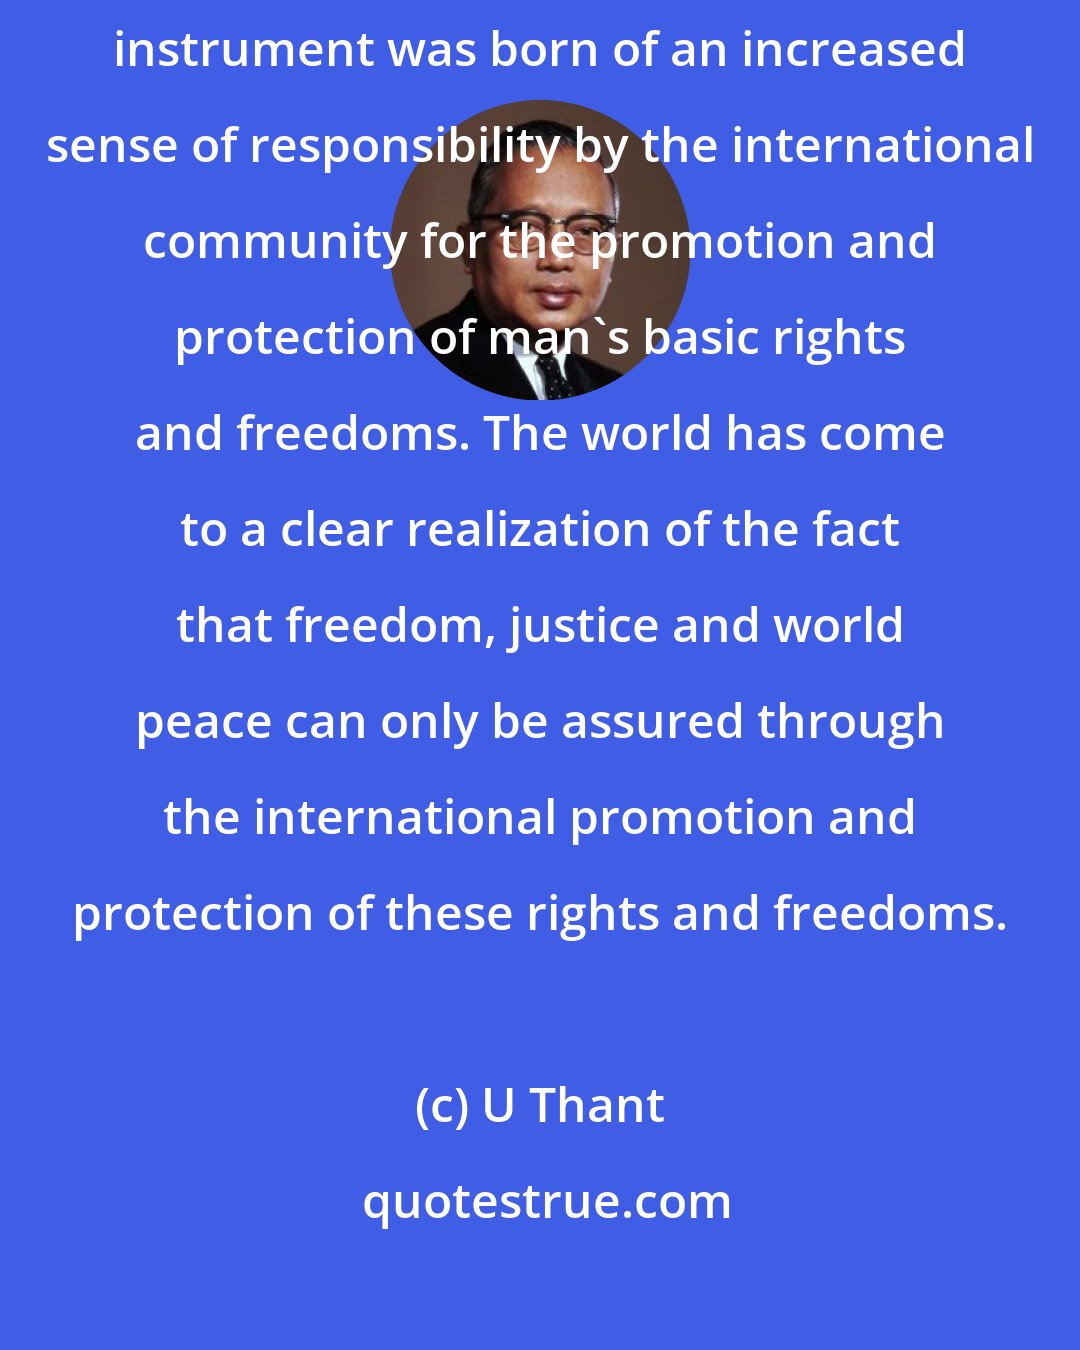 U Thant: The Universal Declaration of Human Rights - This great and inspiring instrument was born of an increased sense of responsibility by the international community for the promotion and protection of man's basic rights and freedoms. The world has come to a clear realization of the fact that freedom, justice and world peace can only be assured through the international promotion and protection of these rights and freedoms.